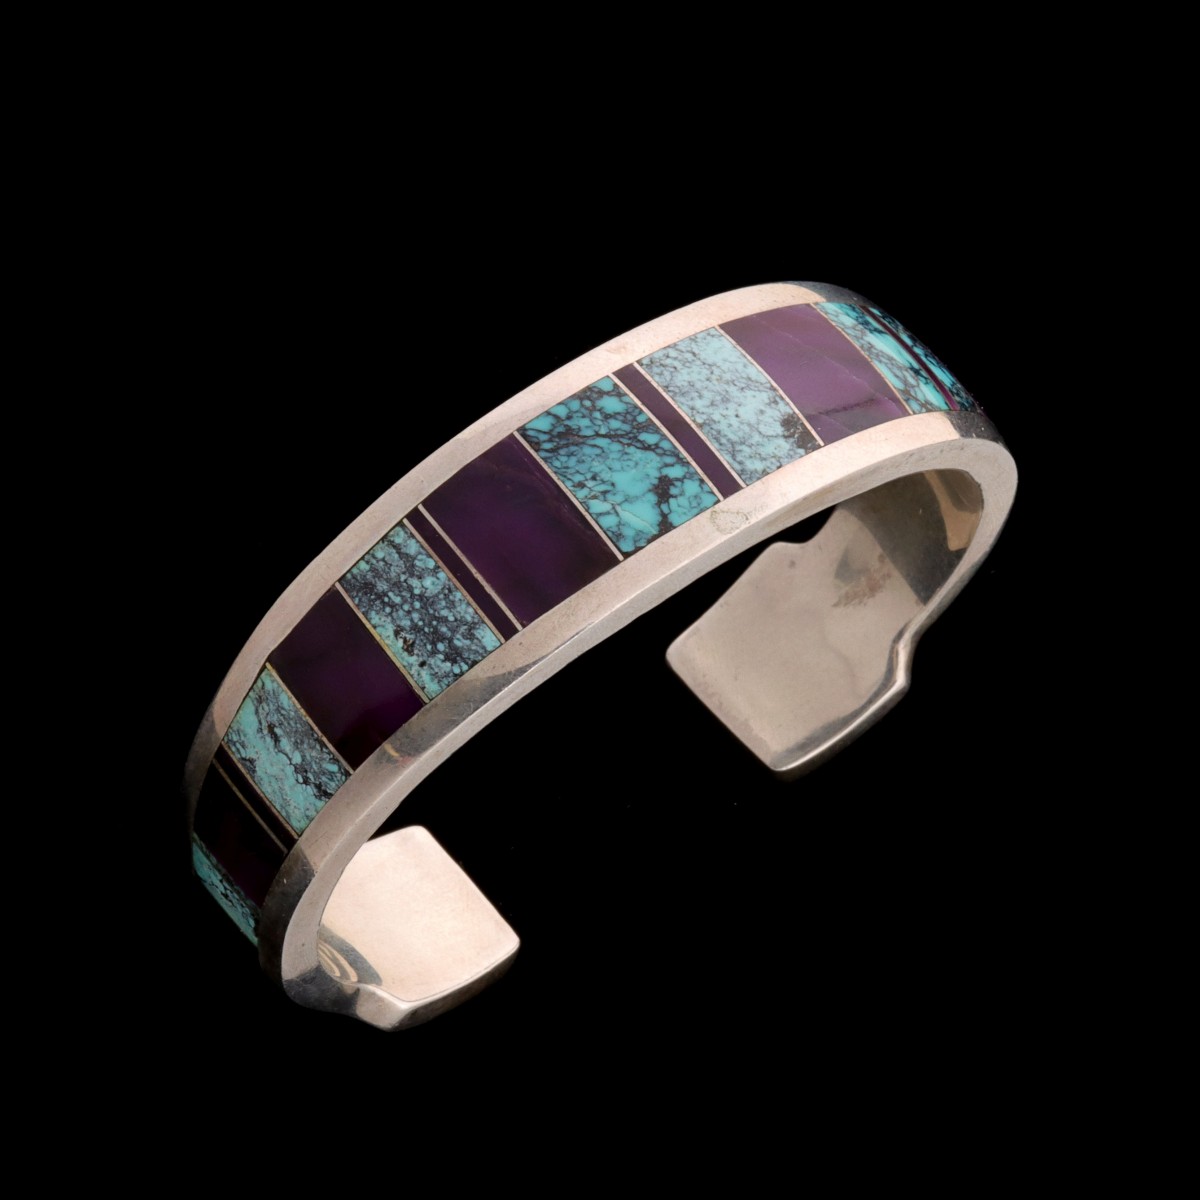 RAY TRACEY KNIFEWING INLAID CUFF BRACELET